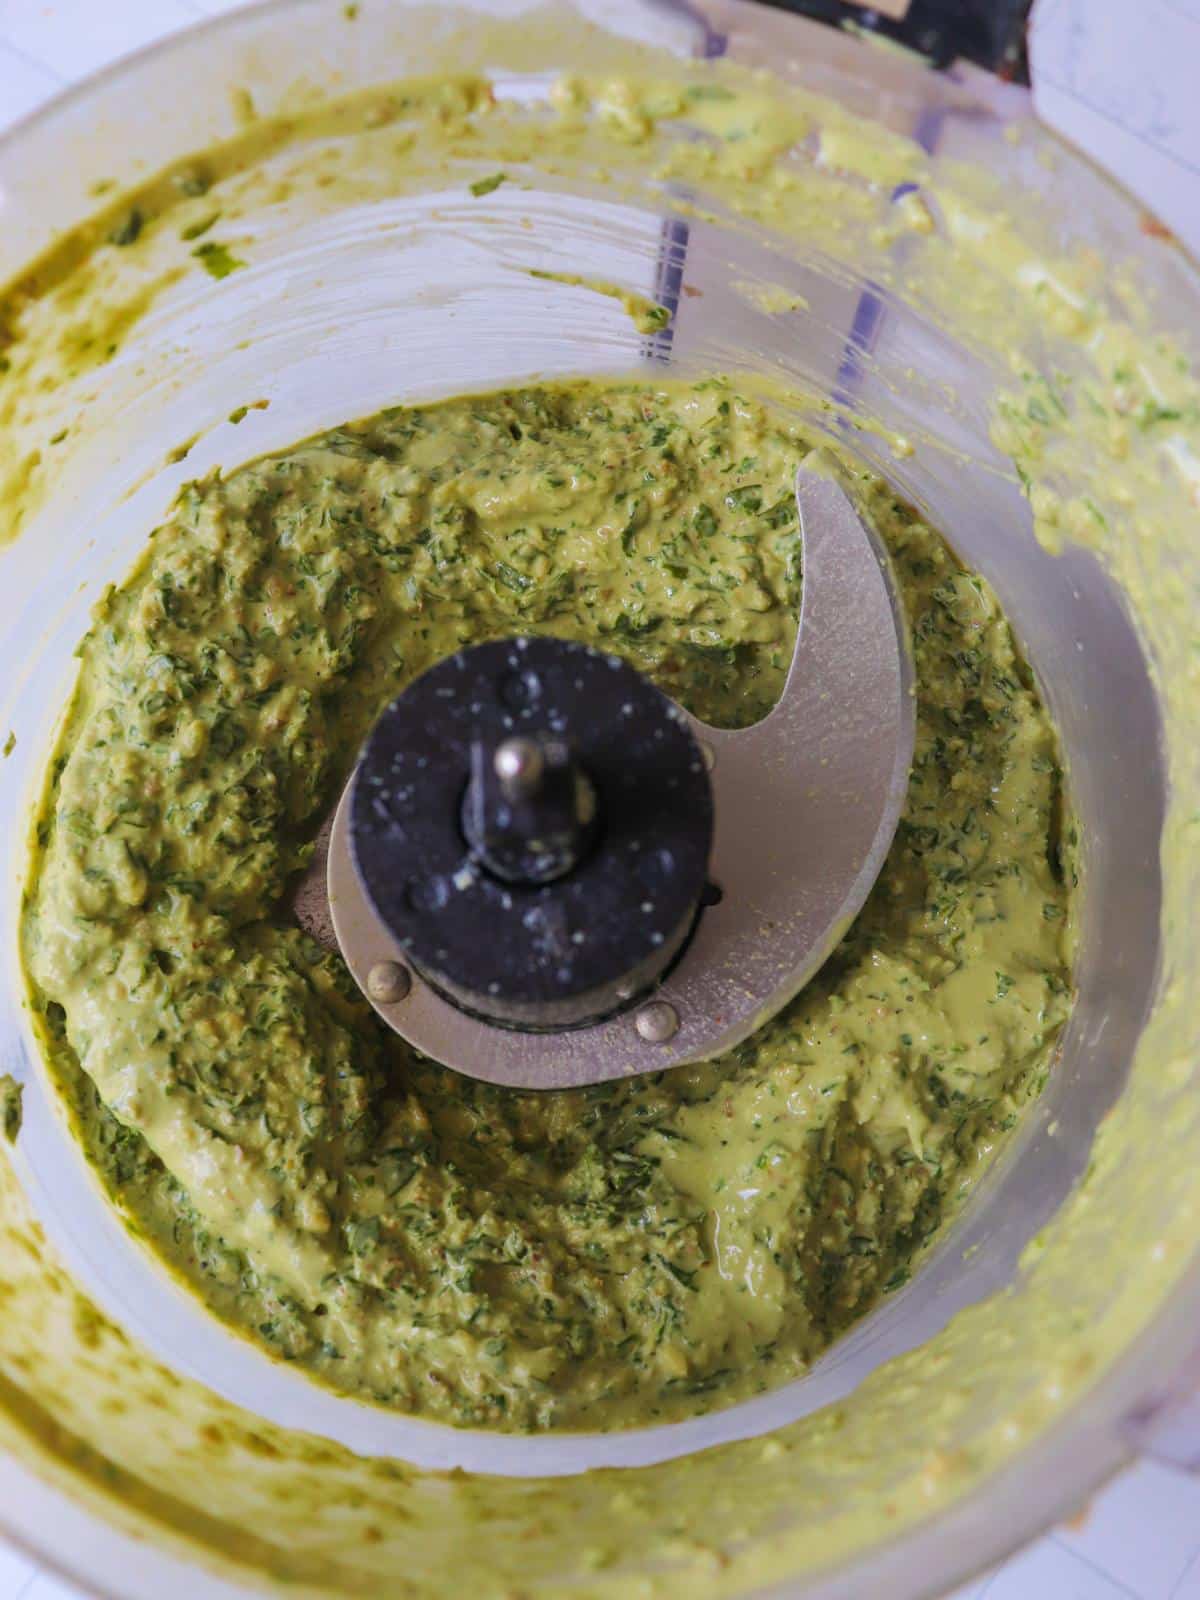 Vegan dairy free pesto blended up in a food processor.